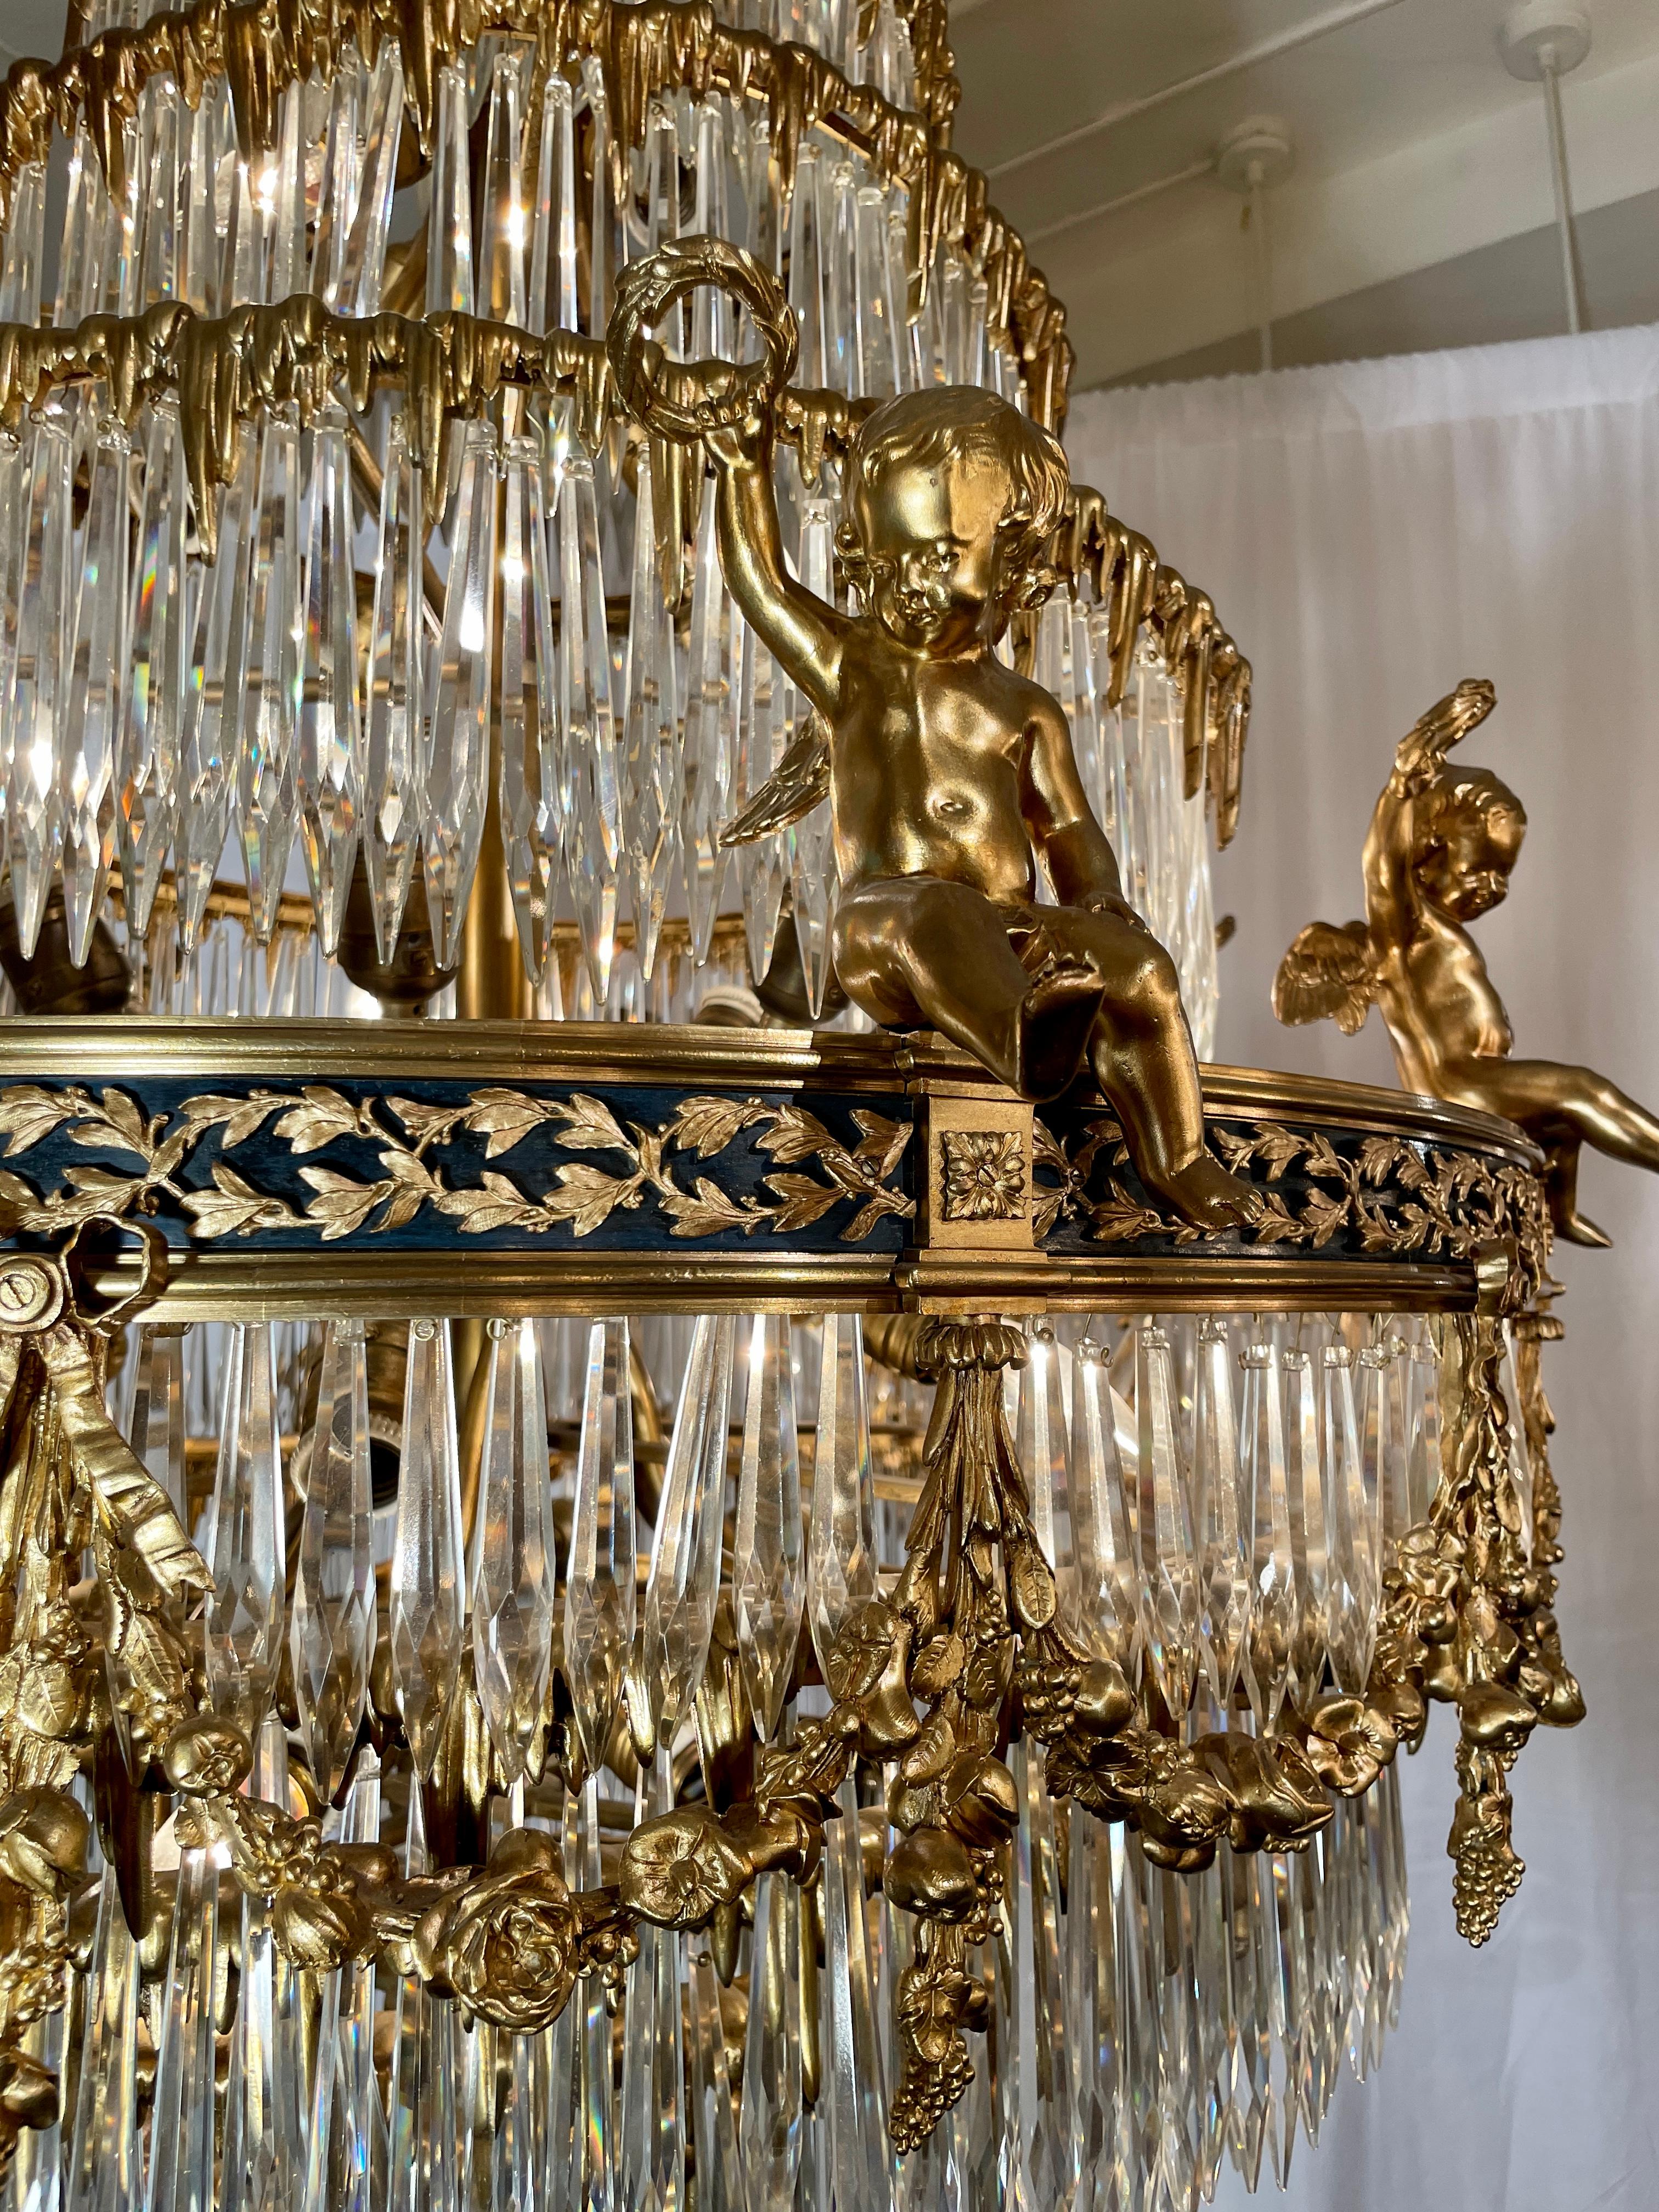 Antique French Baccarat Crystal & Bronze D'Ore Waterfall Chandelier, Circa 1880s For Sale 3